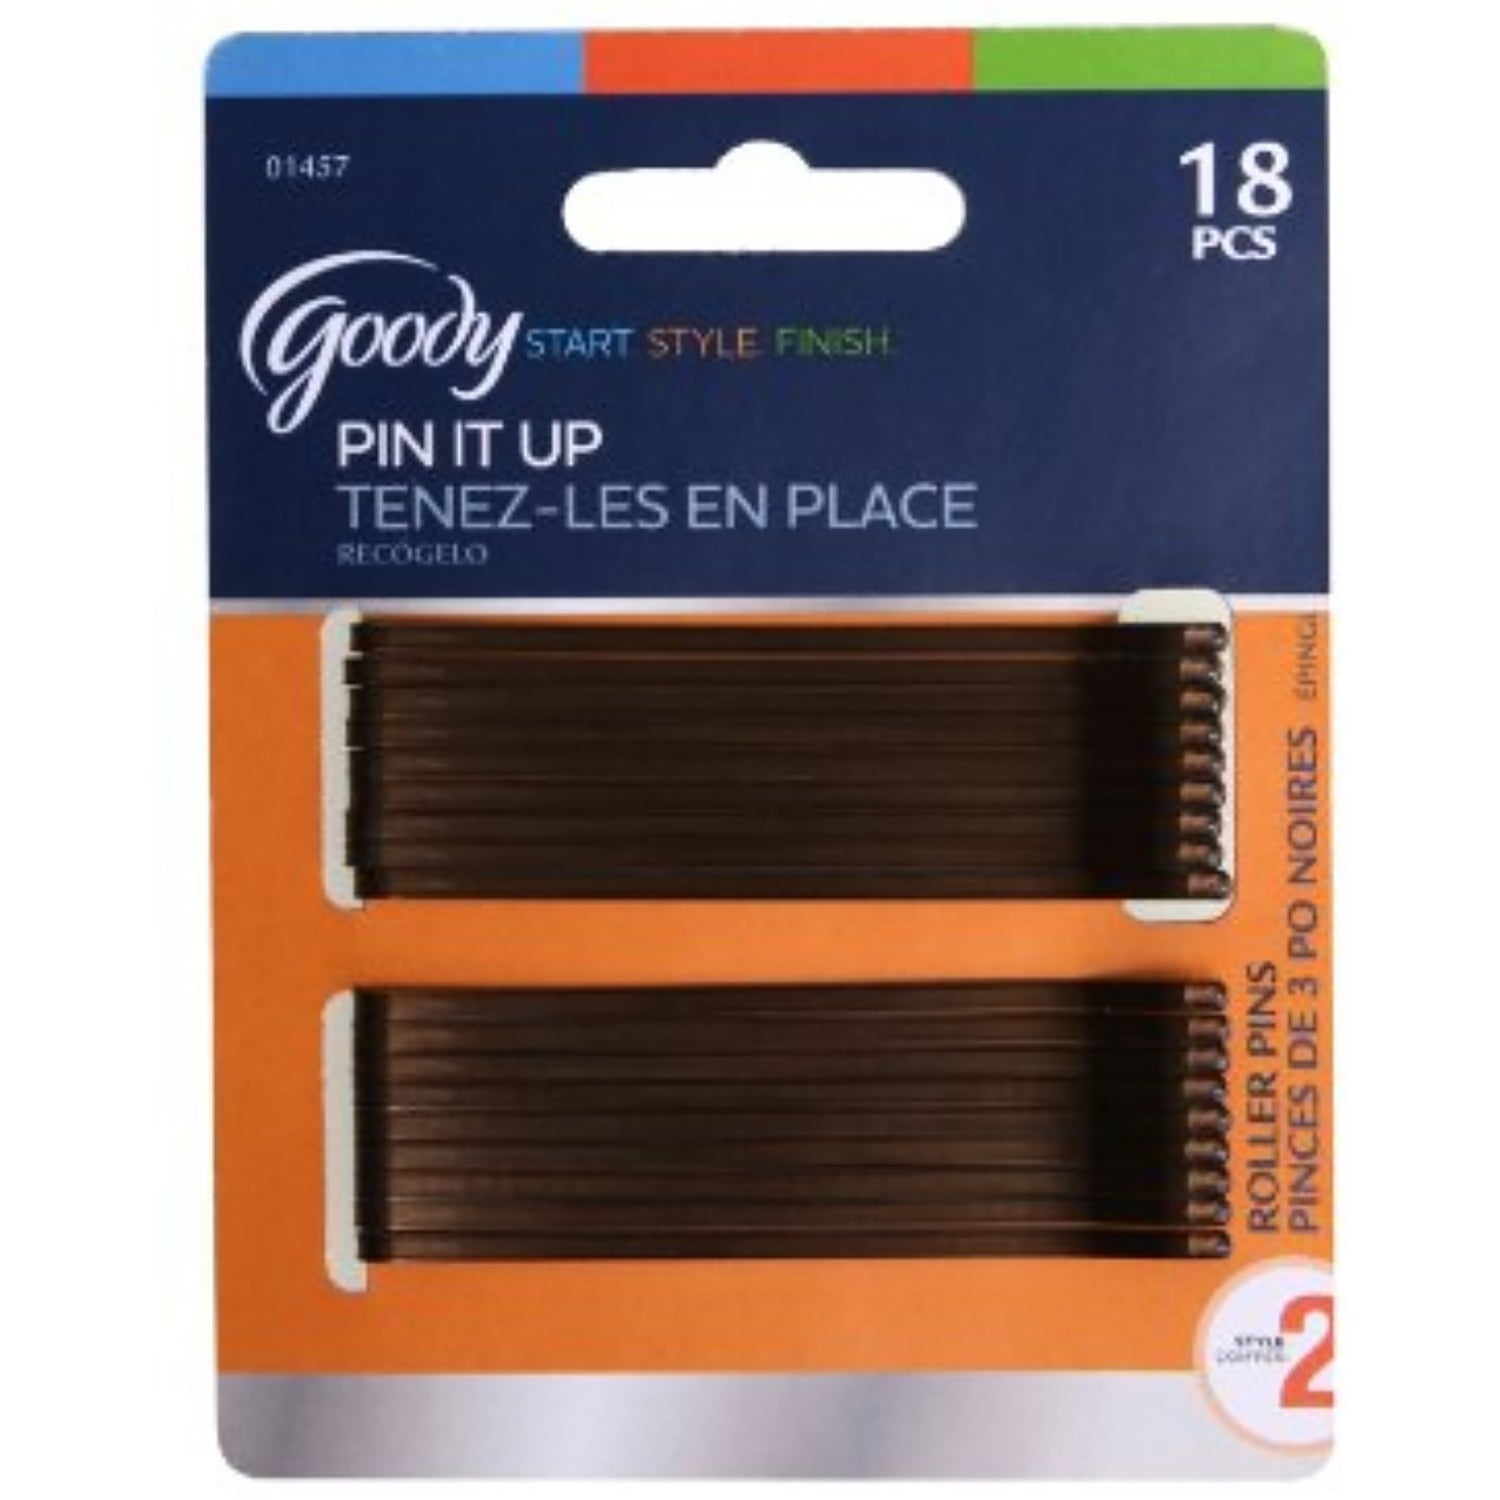 INGOOD Hair Bobby Pins Brown with Cute Case 200 PCS Bobby Pins for